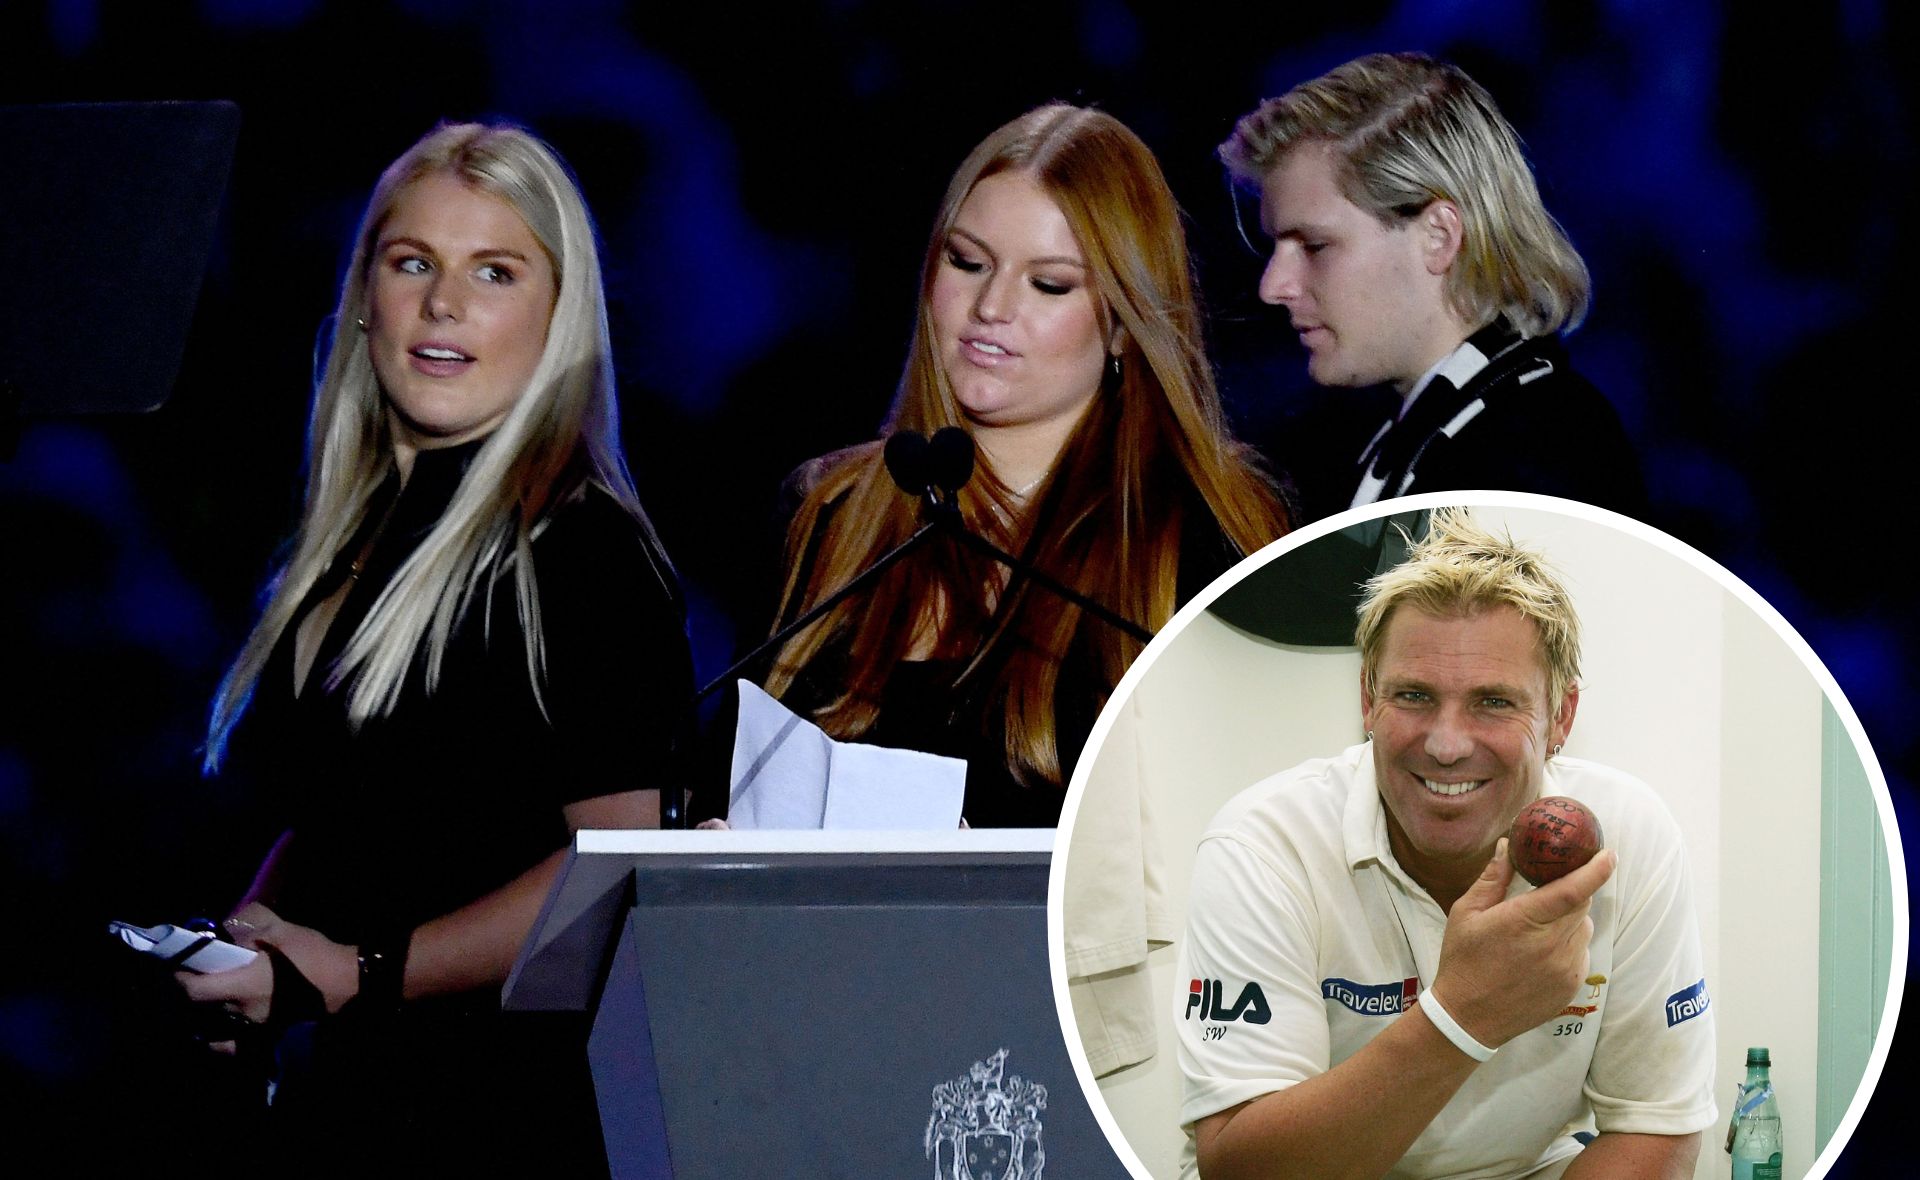 Shane Warne’s children reveal how they feel about cricket now after the loss of their dad